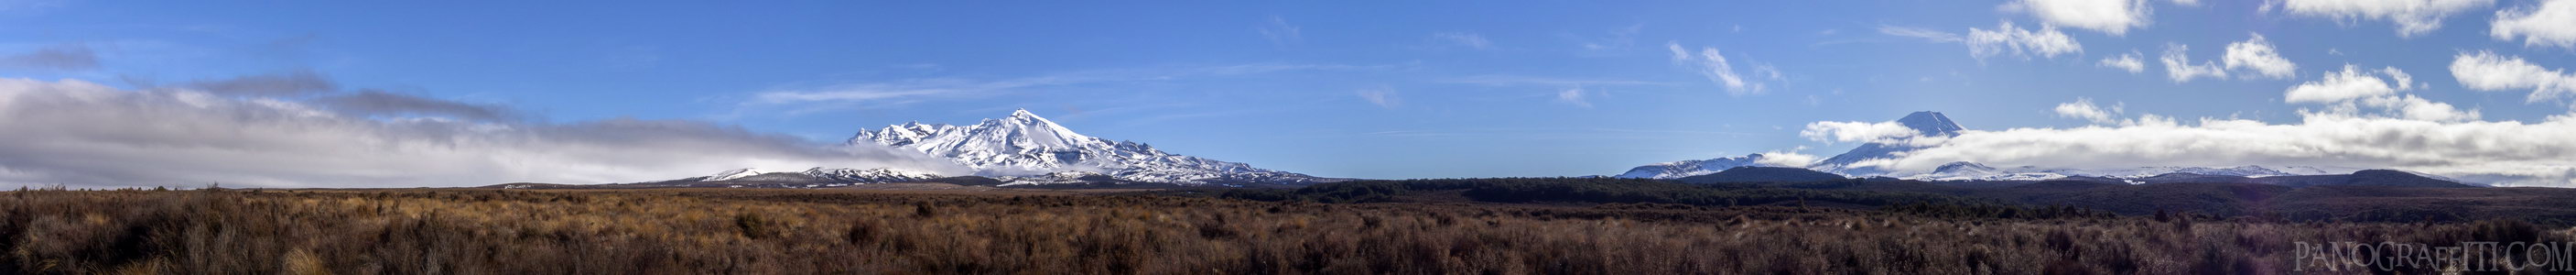 Mt Ruapehu and Ngauruhoe from the Desert Road - Mt Ngauruhoe hiding Mt Ruapehu from Mt Tongariro